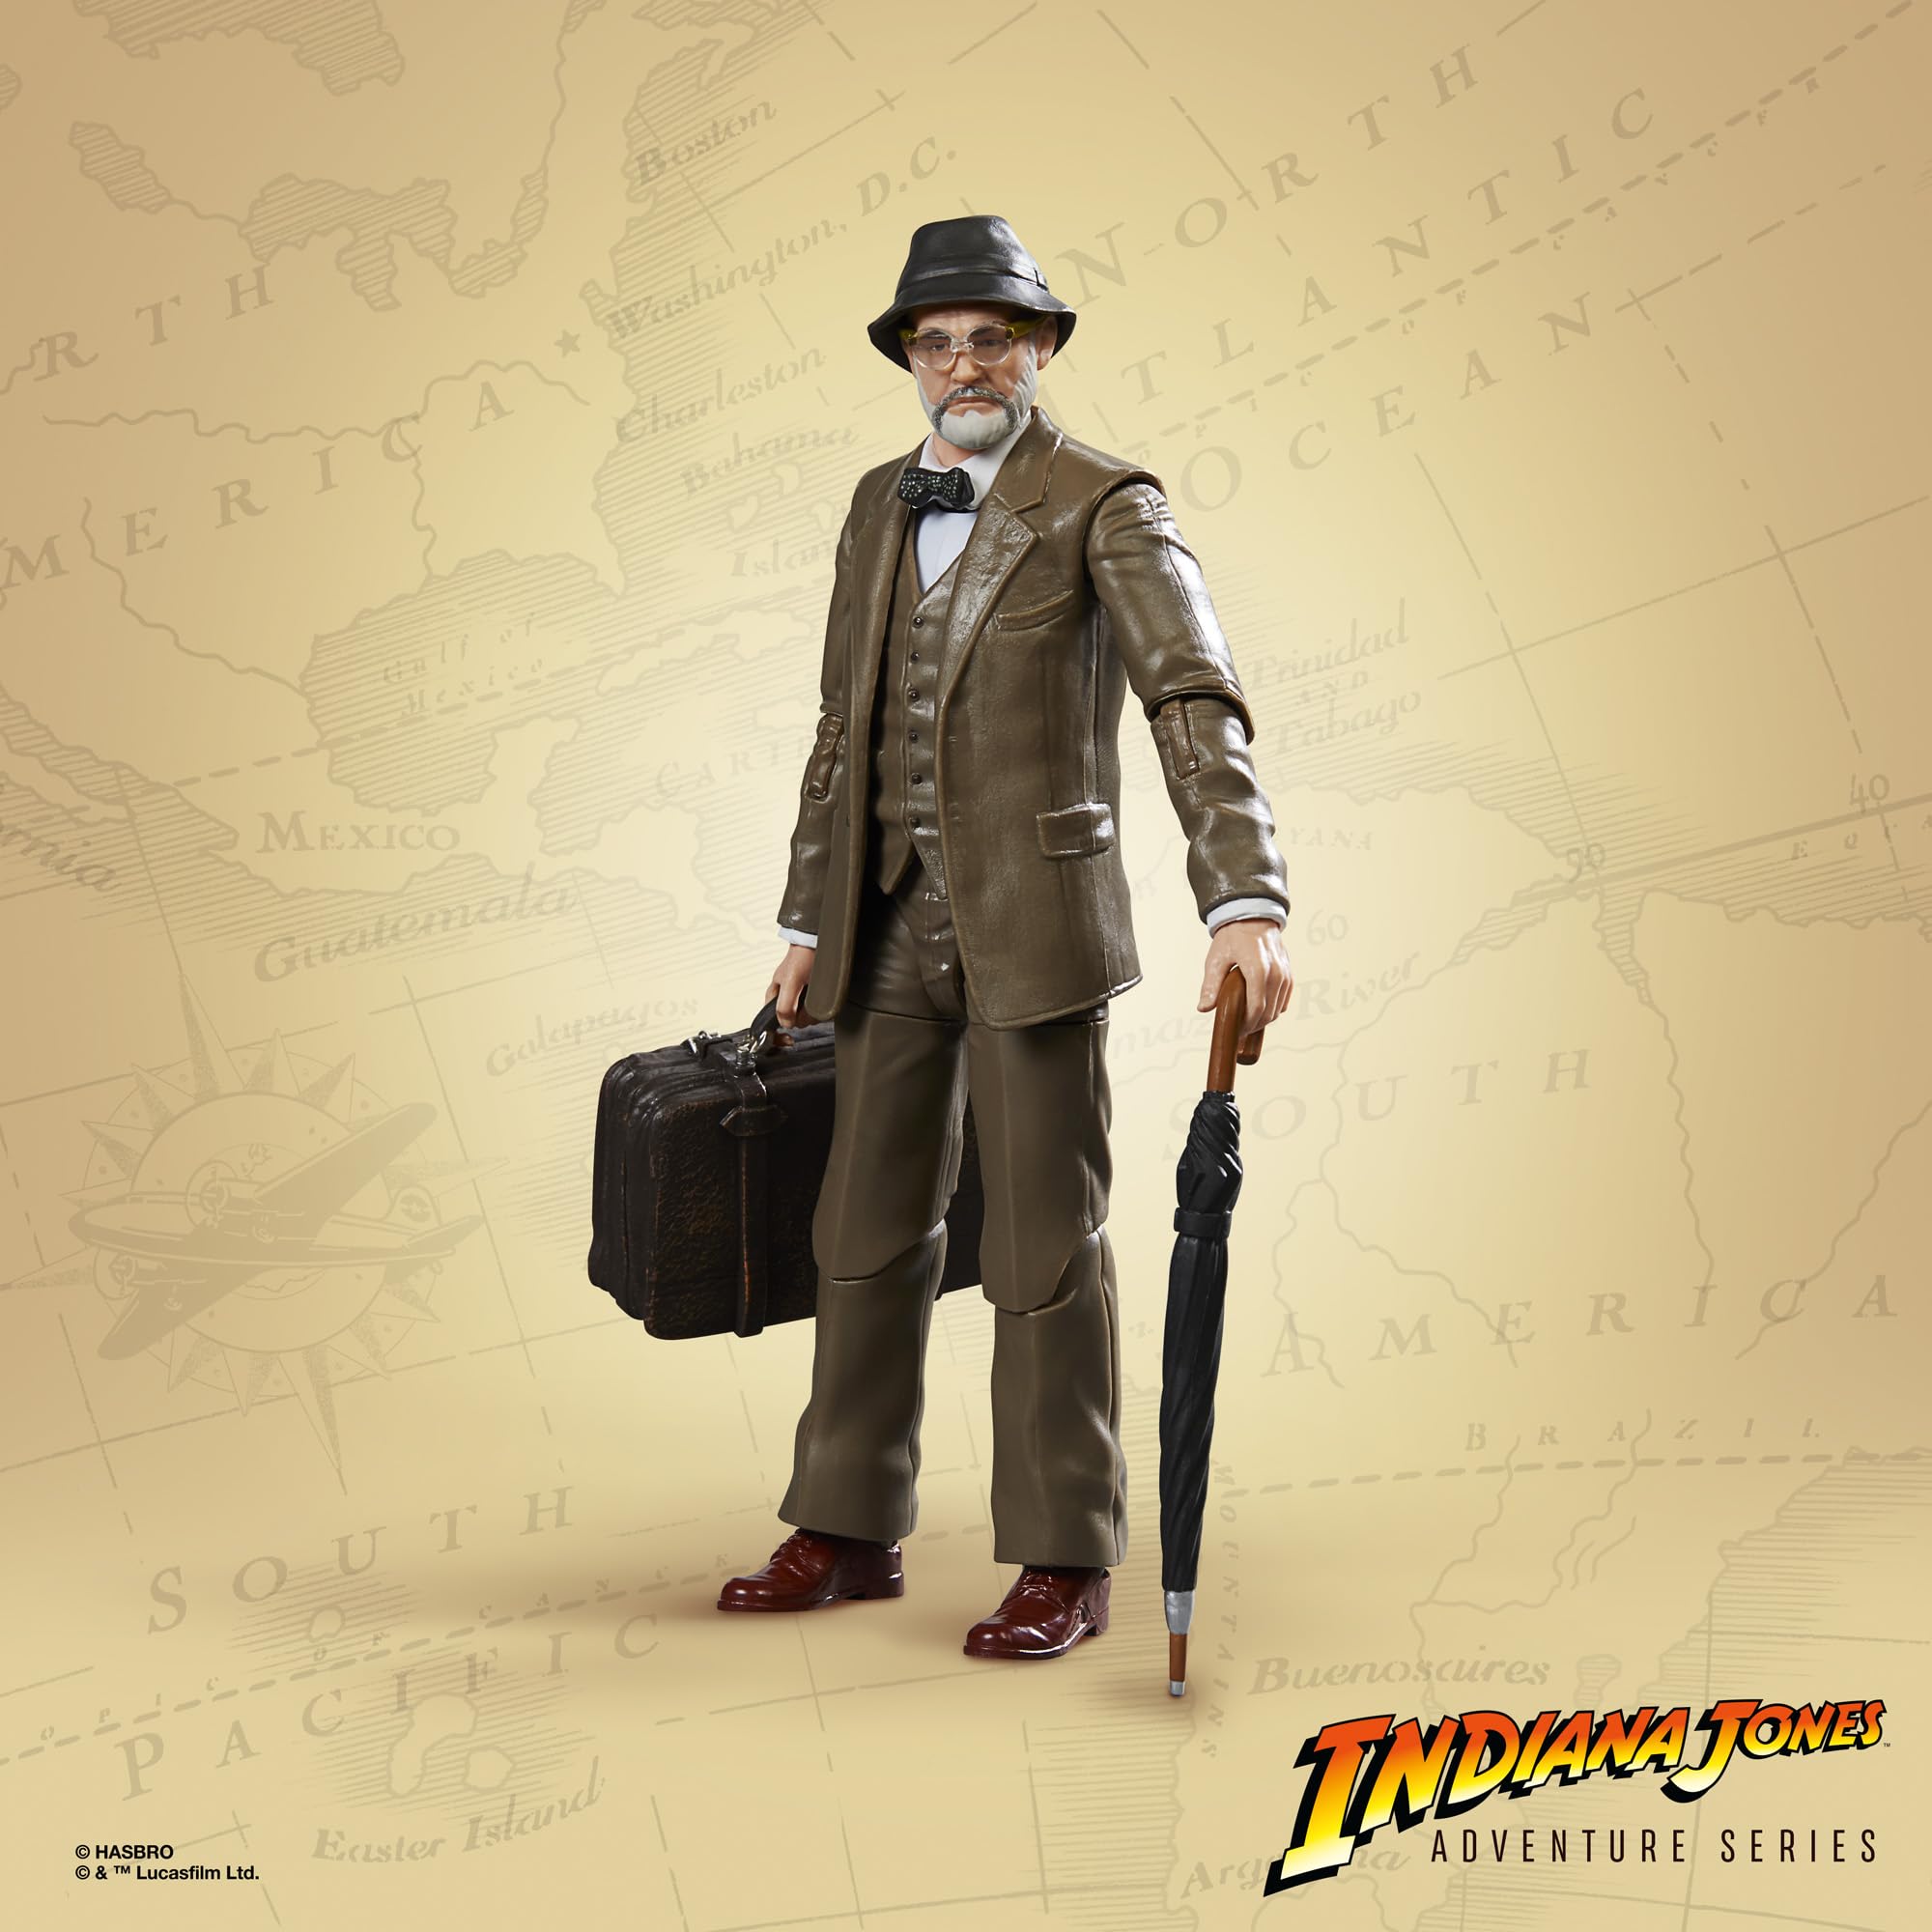 Indiana Jones and The Last Crusade Adventure Series Henry Jones, Sr. Action Figure, 6-inch Action Figures, Toys for Kids Ages 4 and up